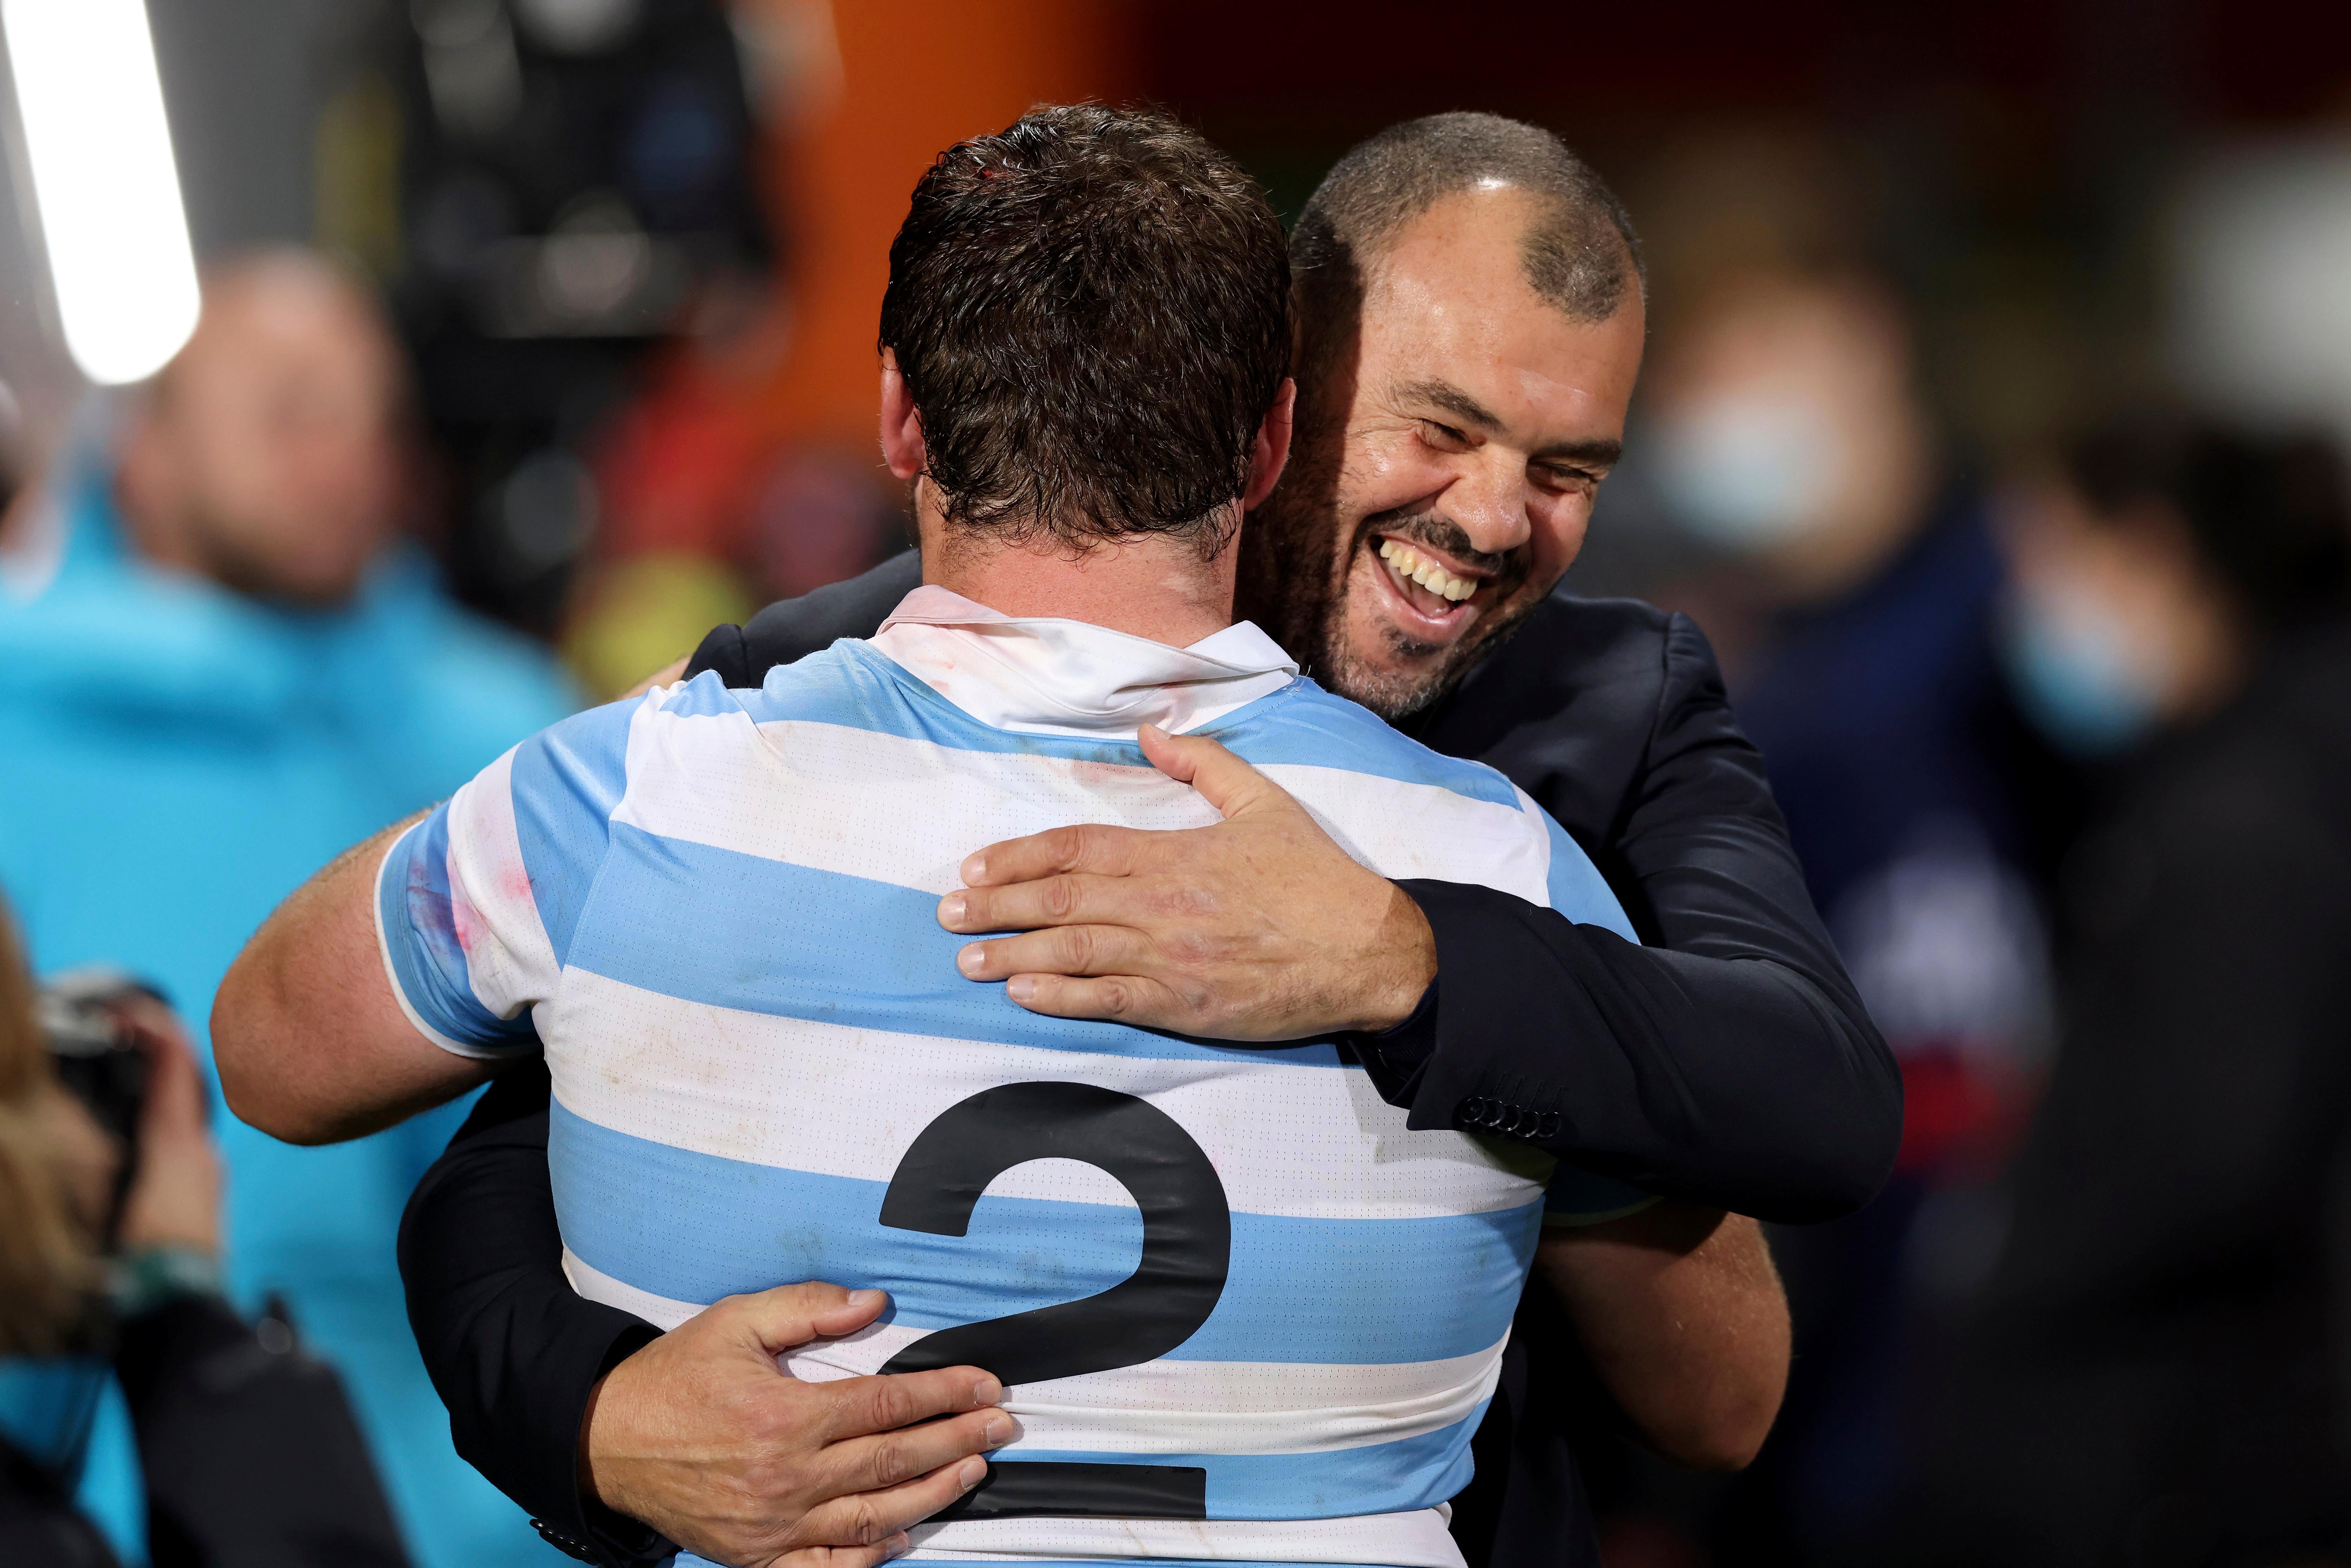 The Pumas beat the All Blacks for the first time on New Zealand soil last weekend